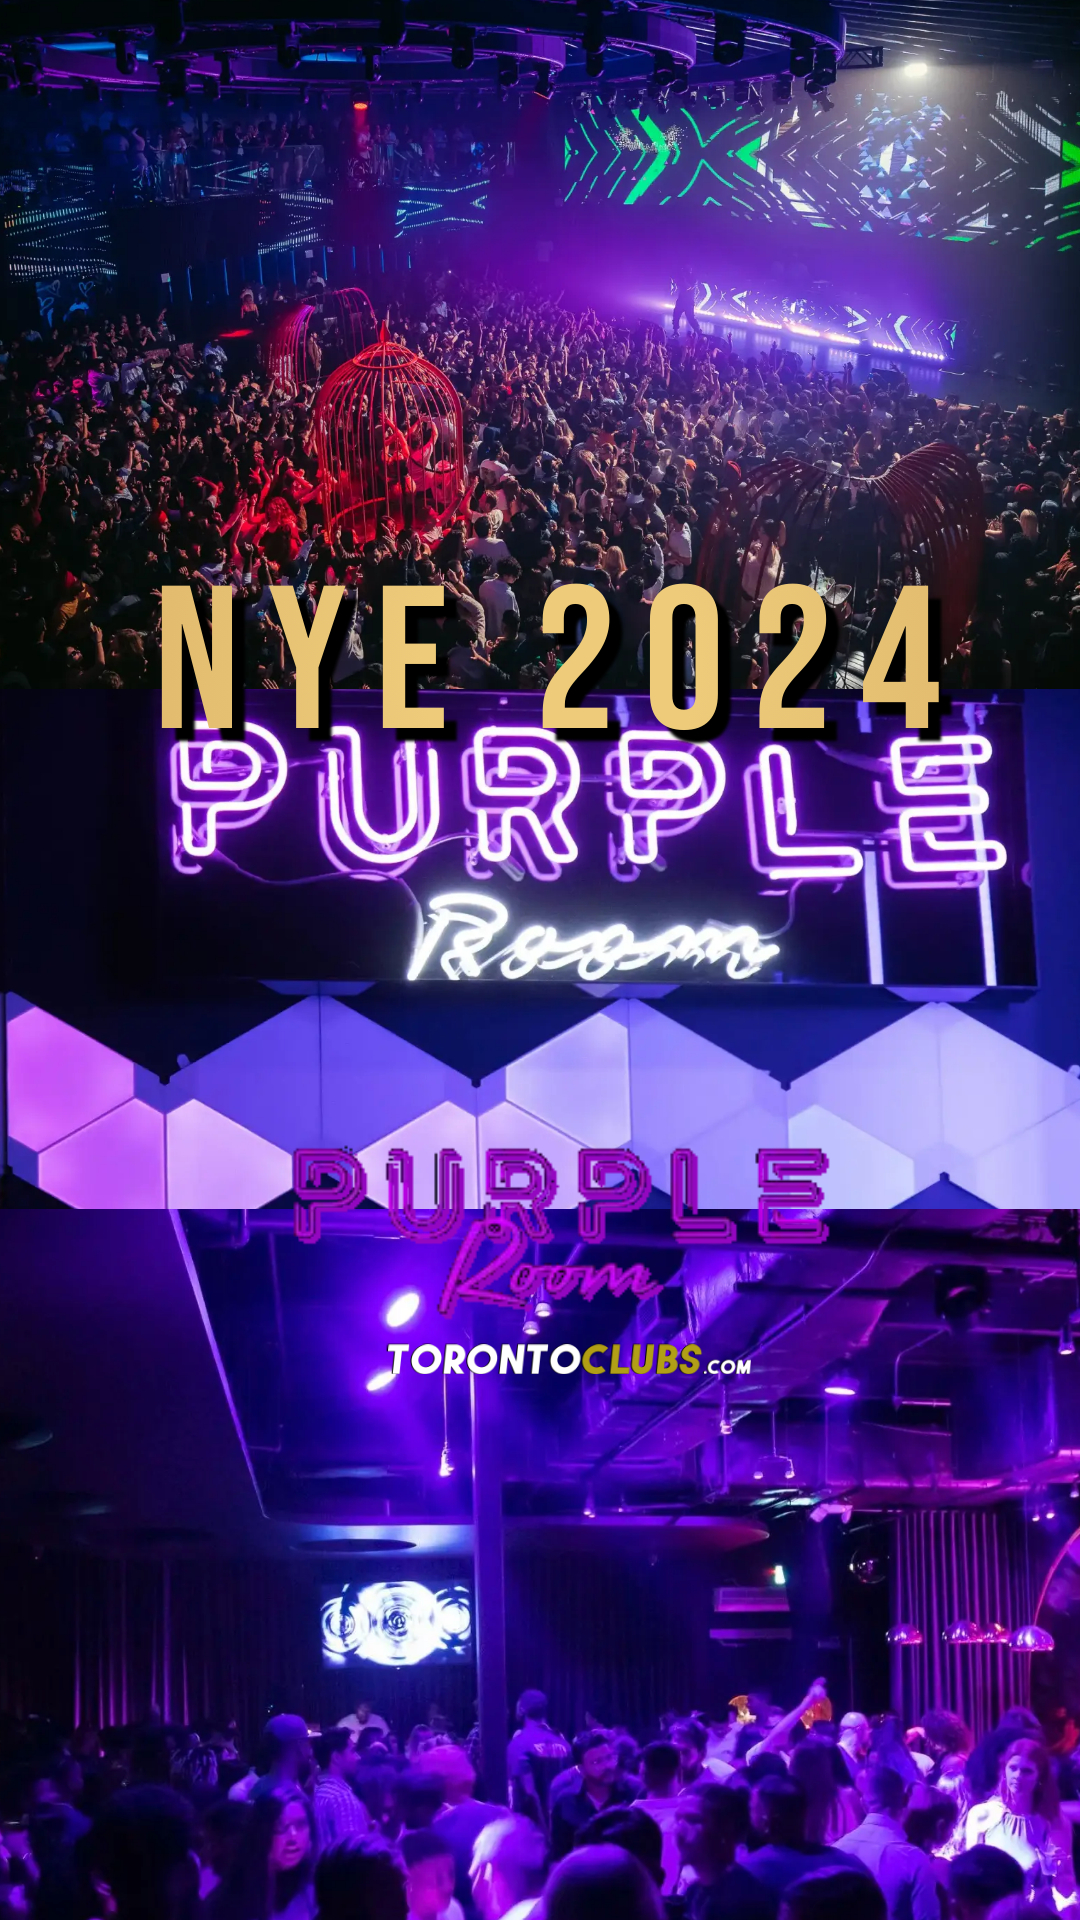 PURPLE ROOM INSIDE REBEL TORONTO NEW YEARS EVE EVENT 2024 HIP HOP PARTY